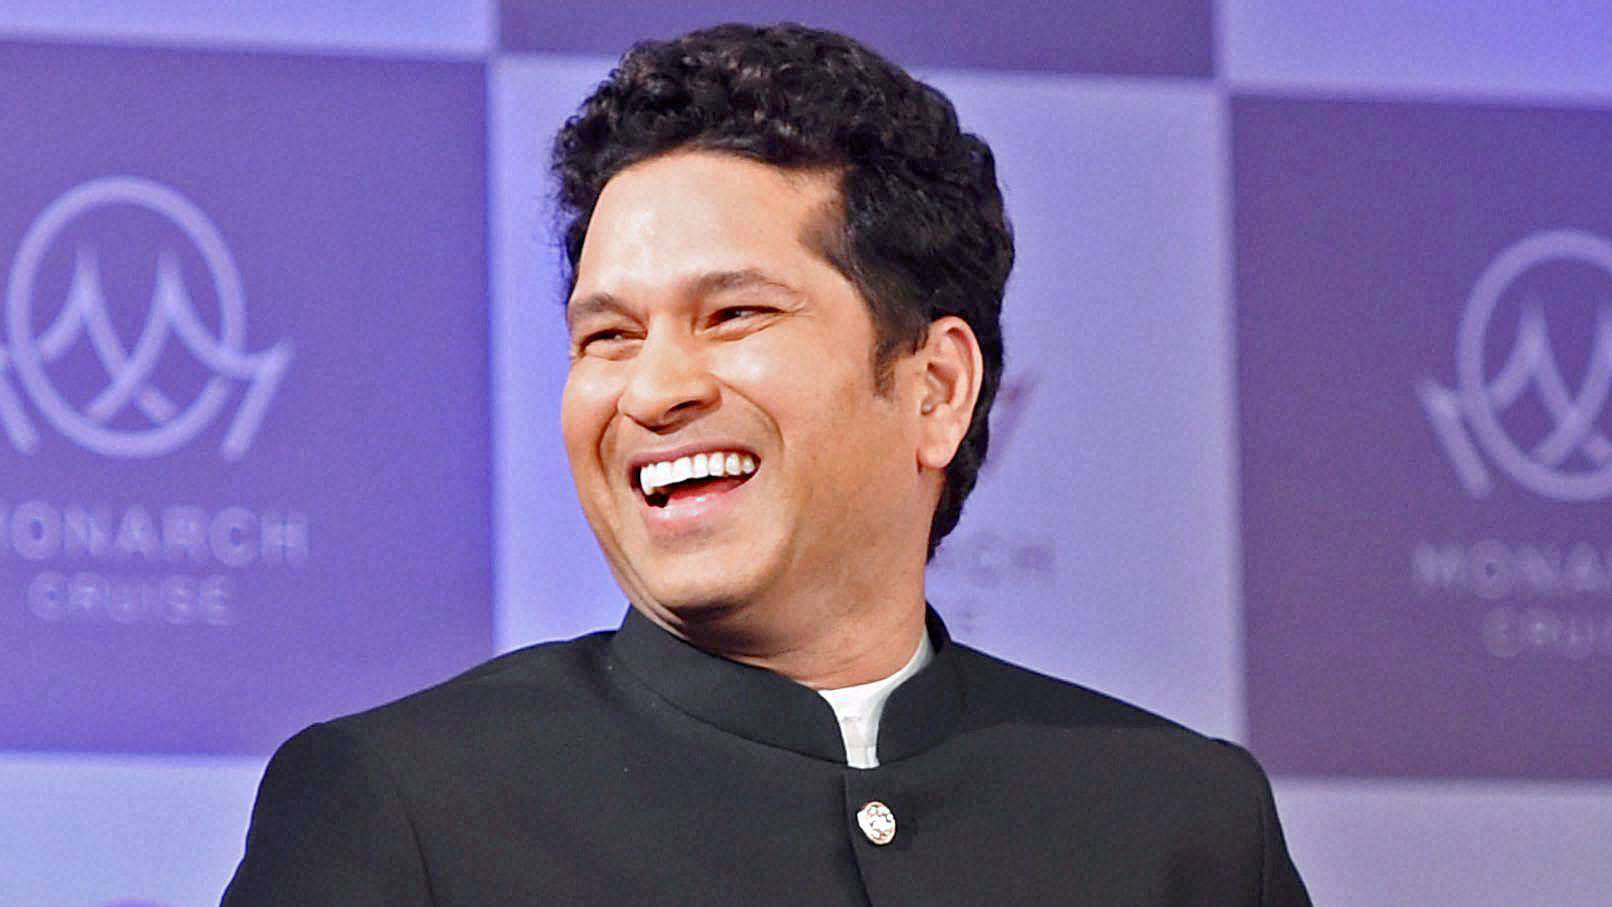 Sachin Tendulkar has no hesitation in terming India as favourites going into the World Cup.